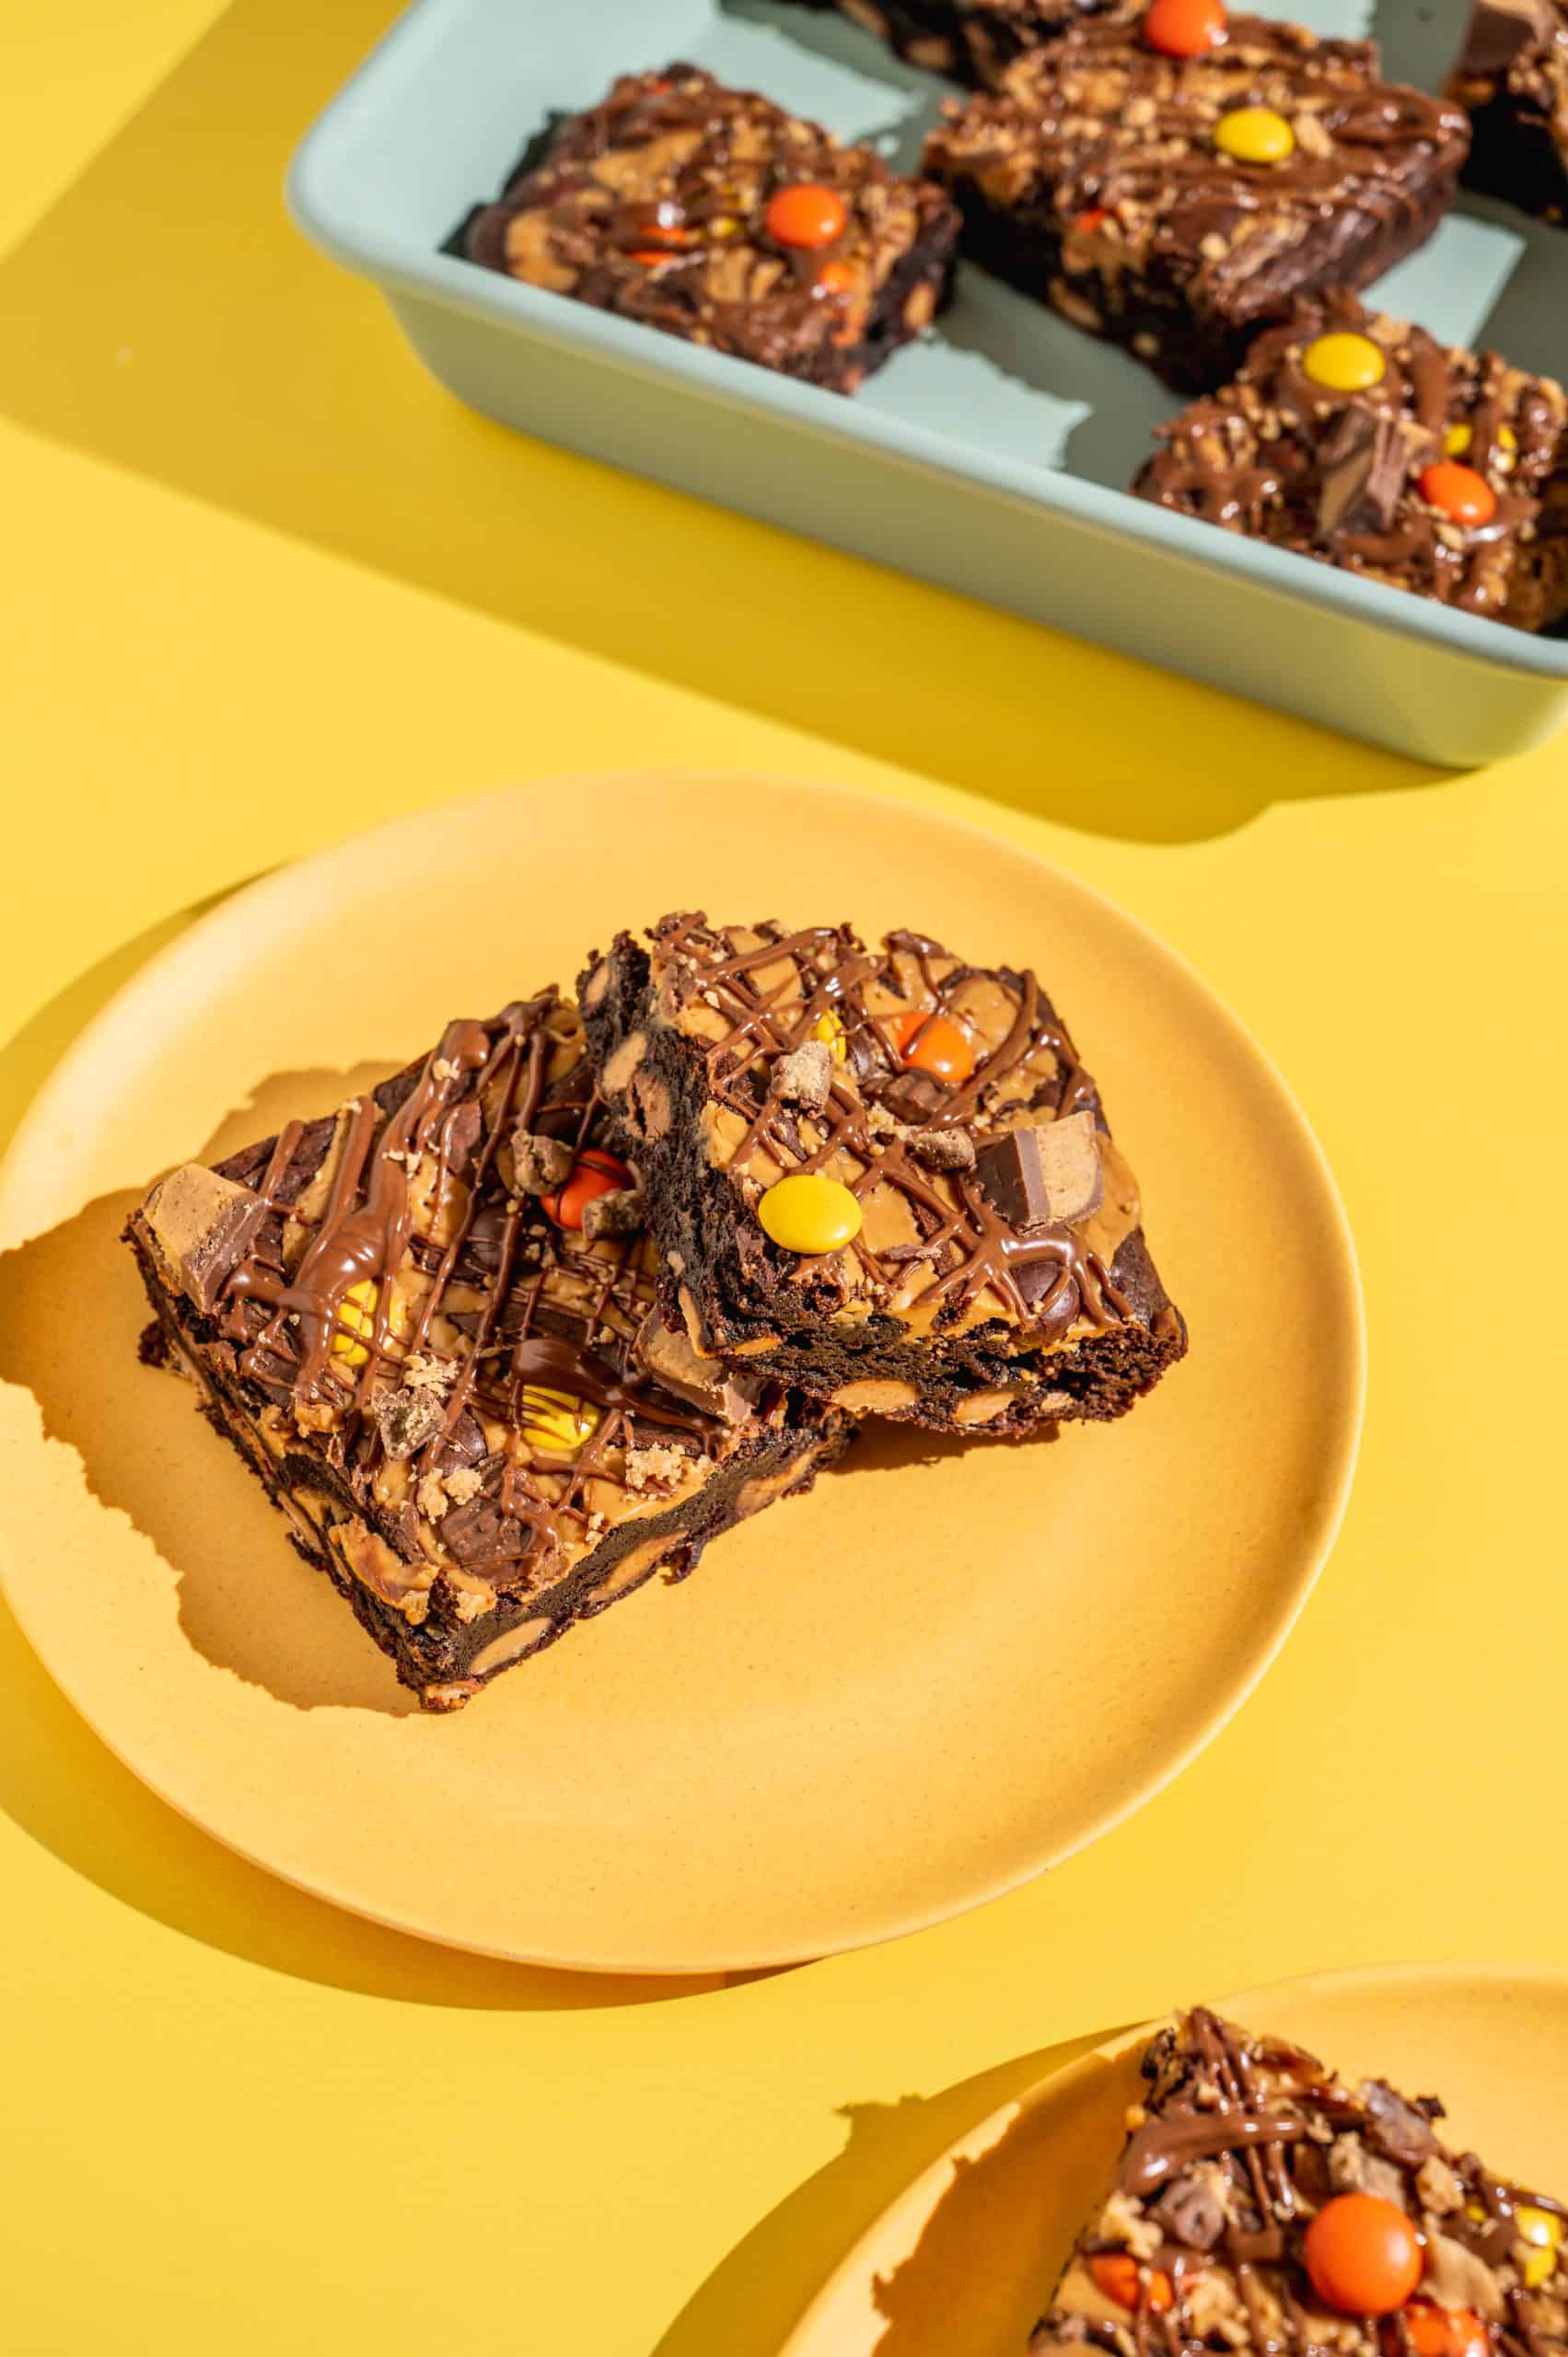 Two Reese's Pieces brownies on a yellow plate with extra brownies in the pan in the background.